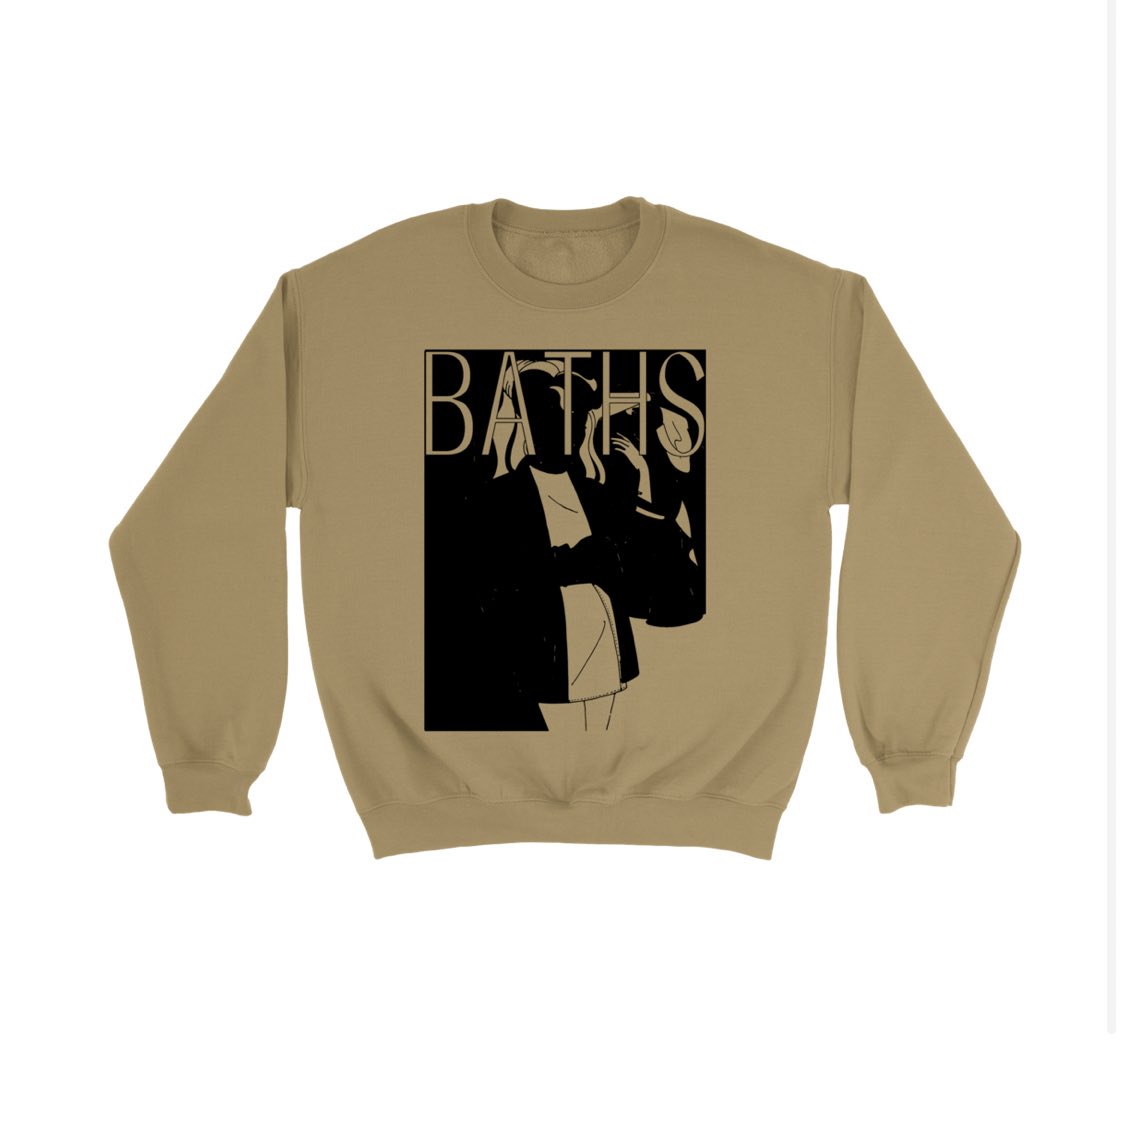 MERCH https://thehyv.shop/collections/bathsAll merch designs byBryant Rutledge ( @LOW_LIMIT)Pop Music / False B-SidesPop Music / False B-Sides IIVINYL pre-orders available nowlimited quantities:PM/FBS 1 - 380PM/FBS 2 - 400